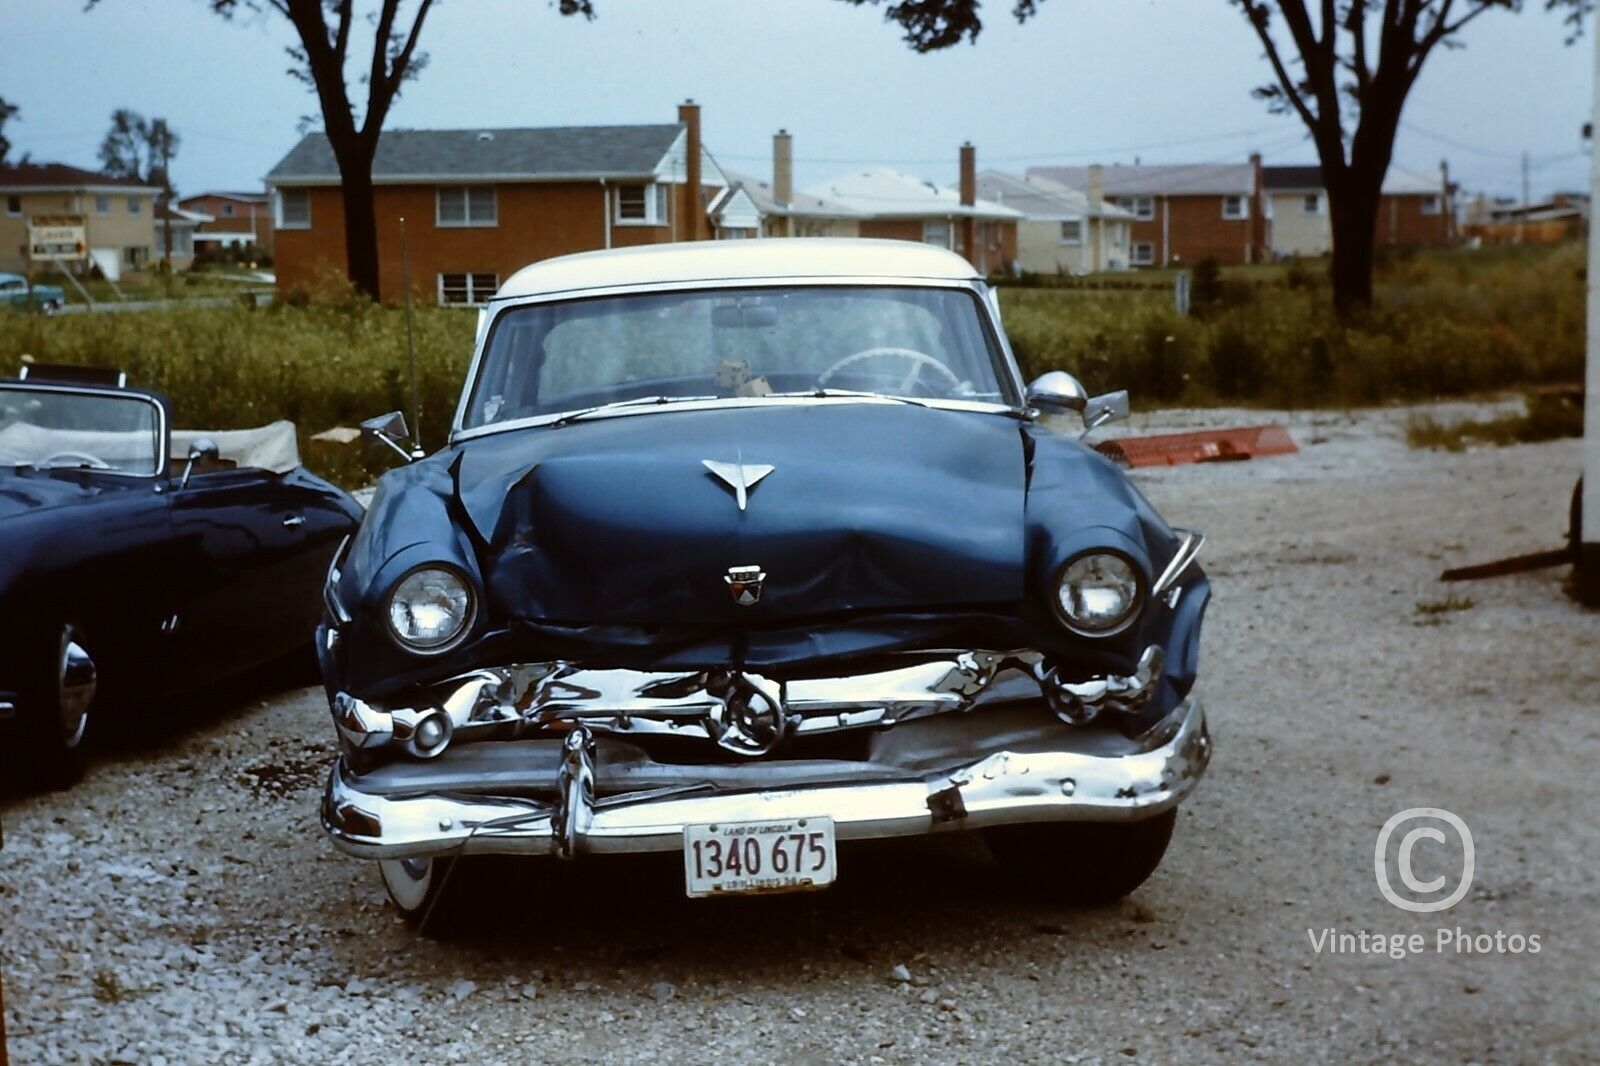 1960s Classis American Blue Ford Automobile with Dented Front